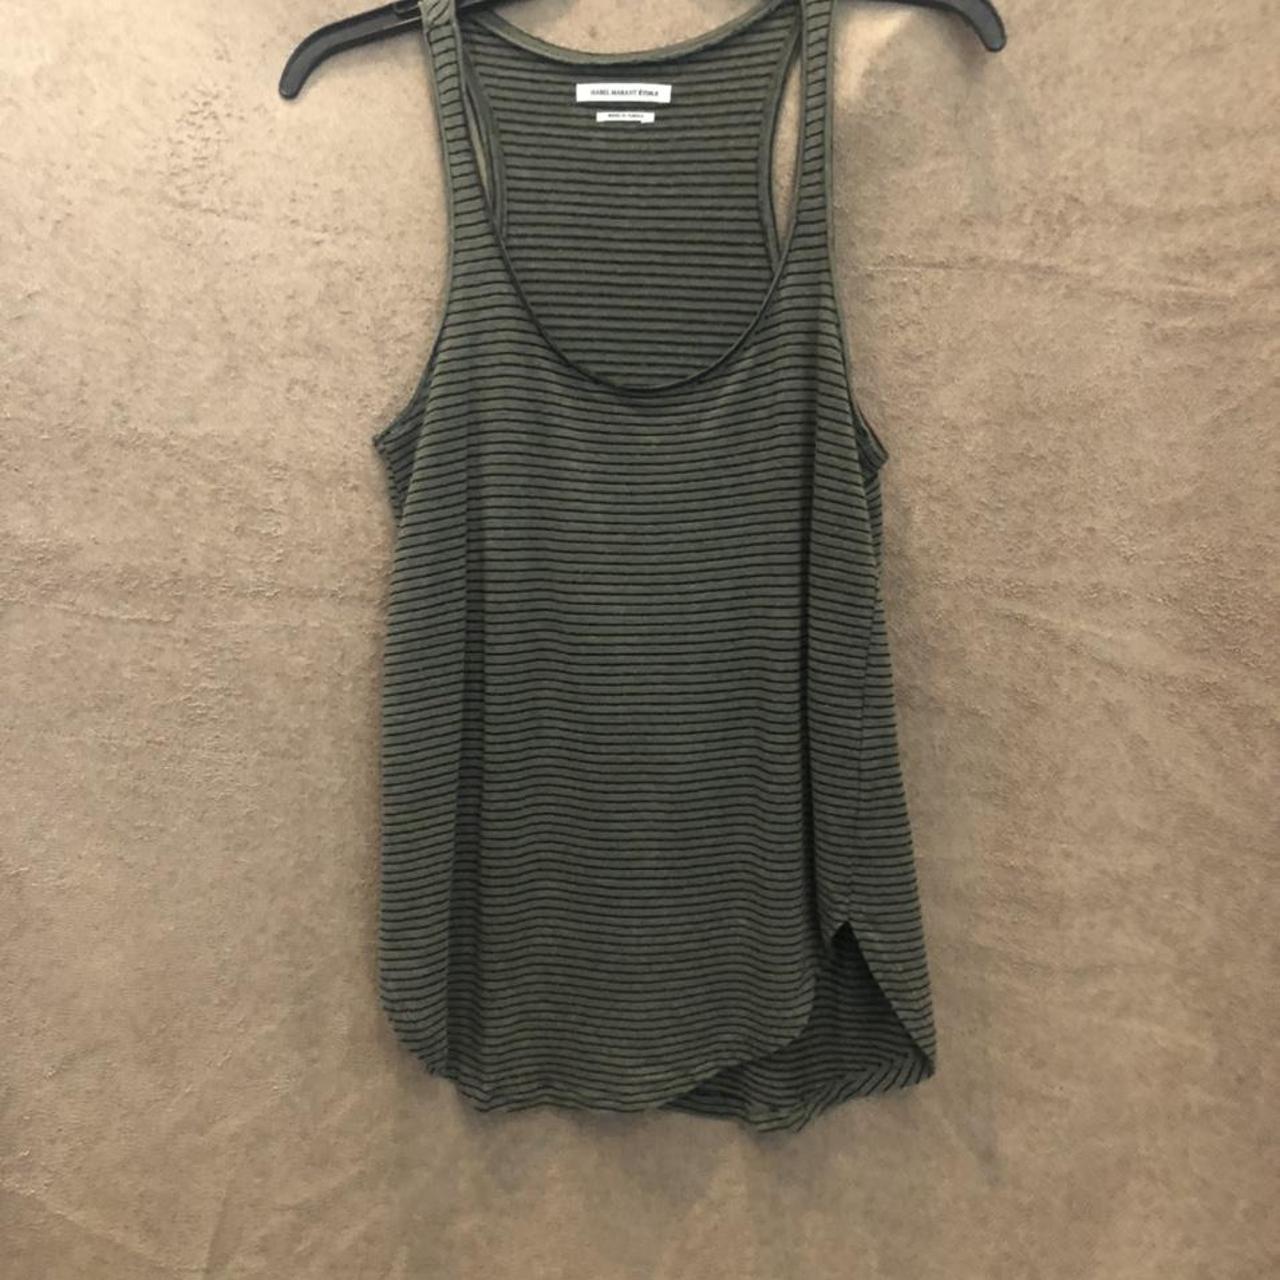 Isabel Marant Etoile racer back tank with tan and... - Depop